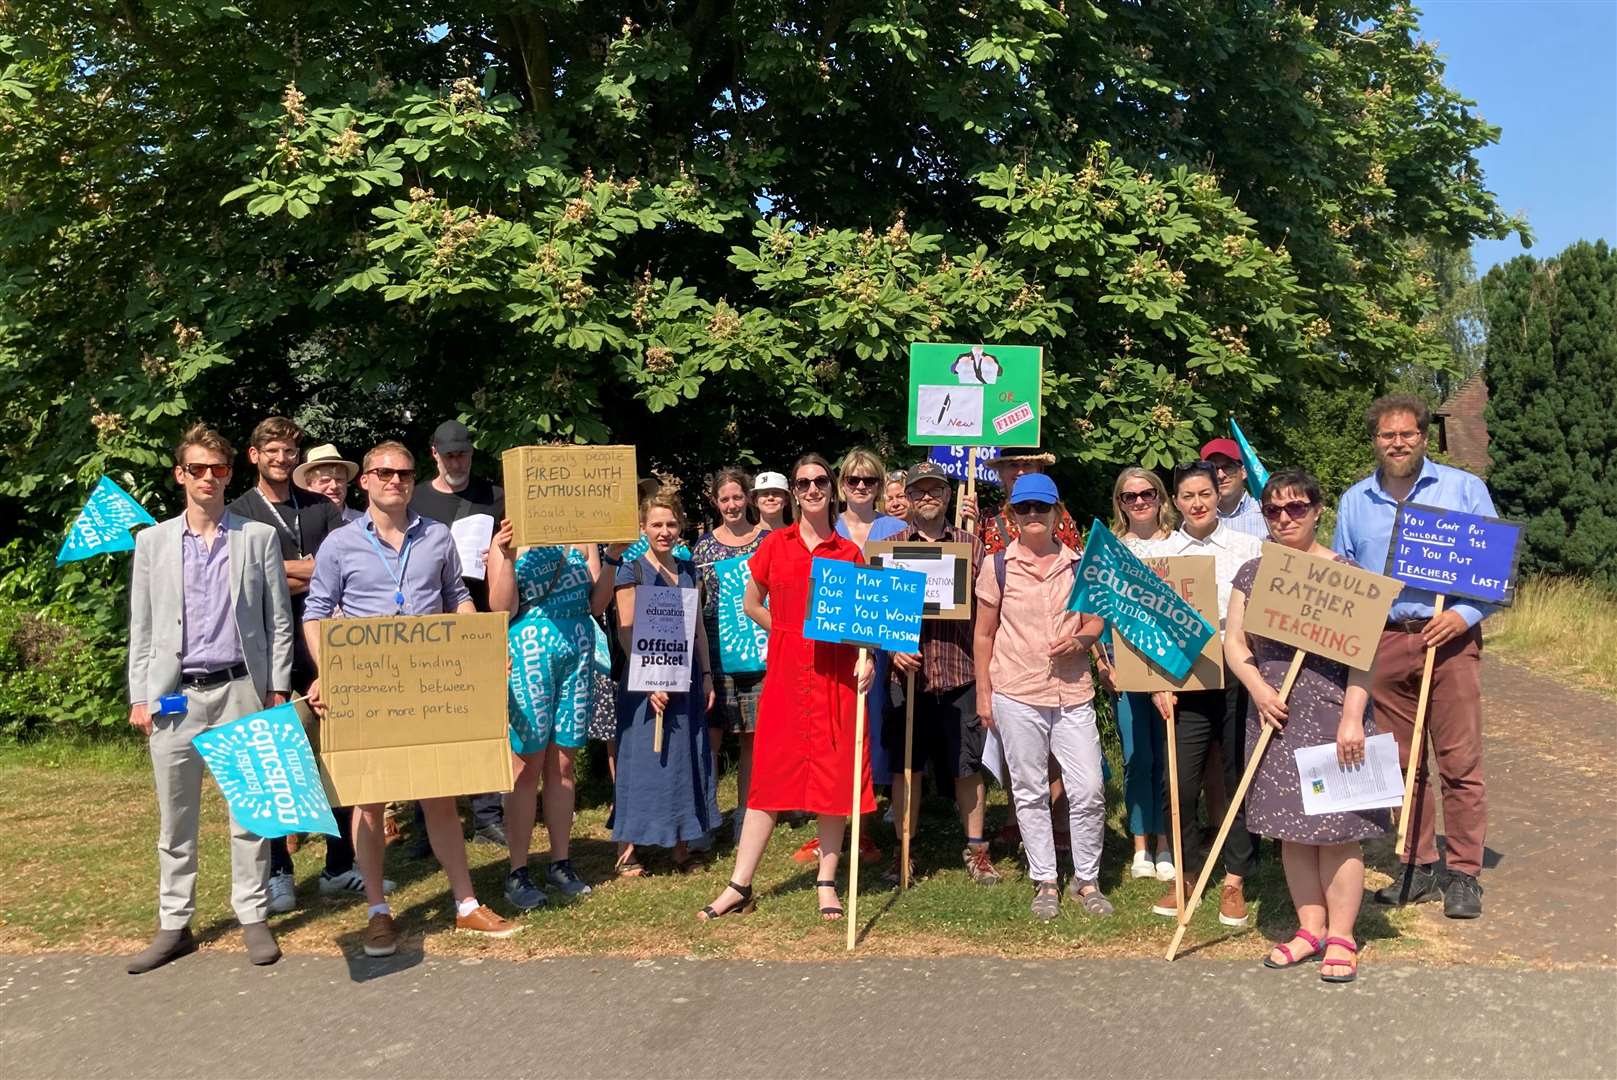 Staff on strike at the King's School in Canterbury over a pensions dispute